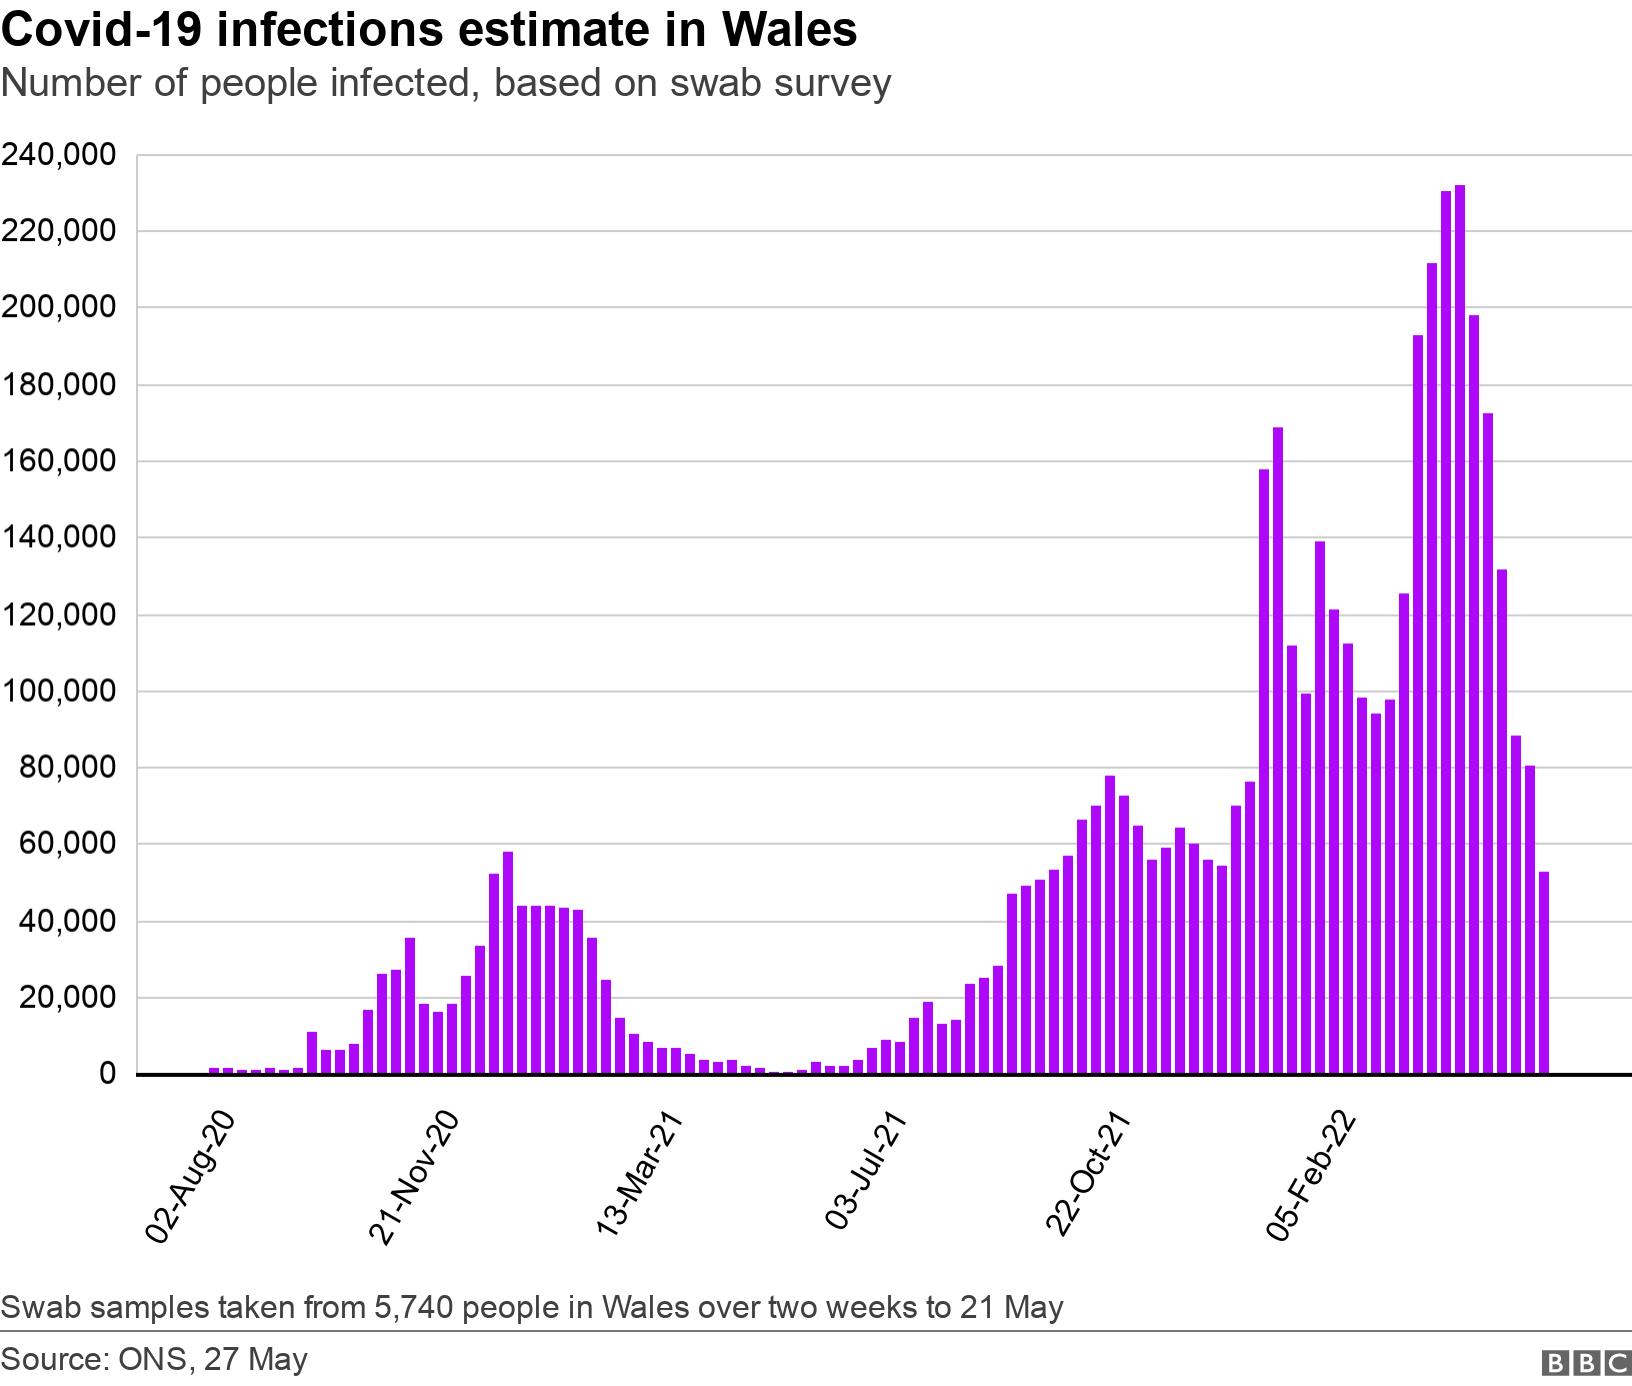 Covid-19 infections estimate in Wales. Number of people infected, based on swab survey.  Swab samples taken from 5,740 people in Wales over two weeks to 21 May.